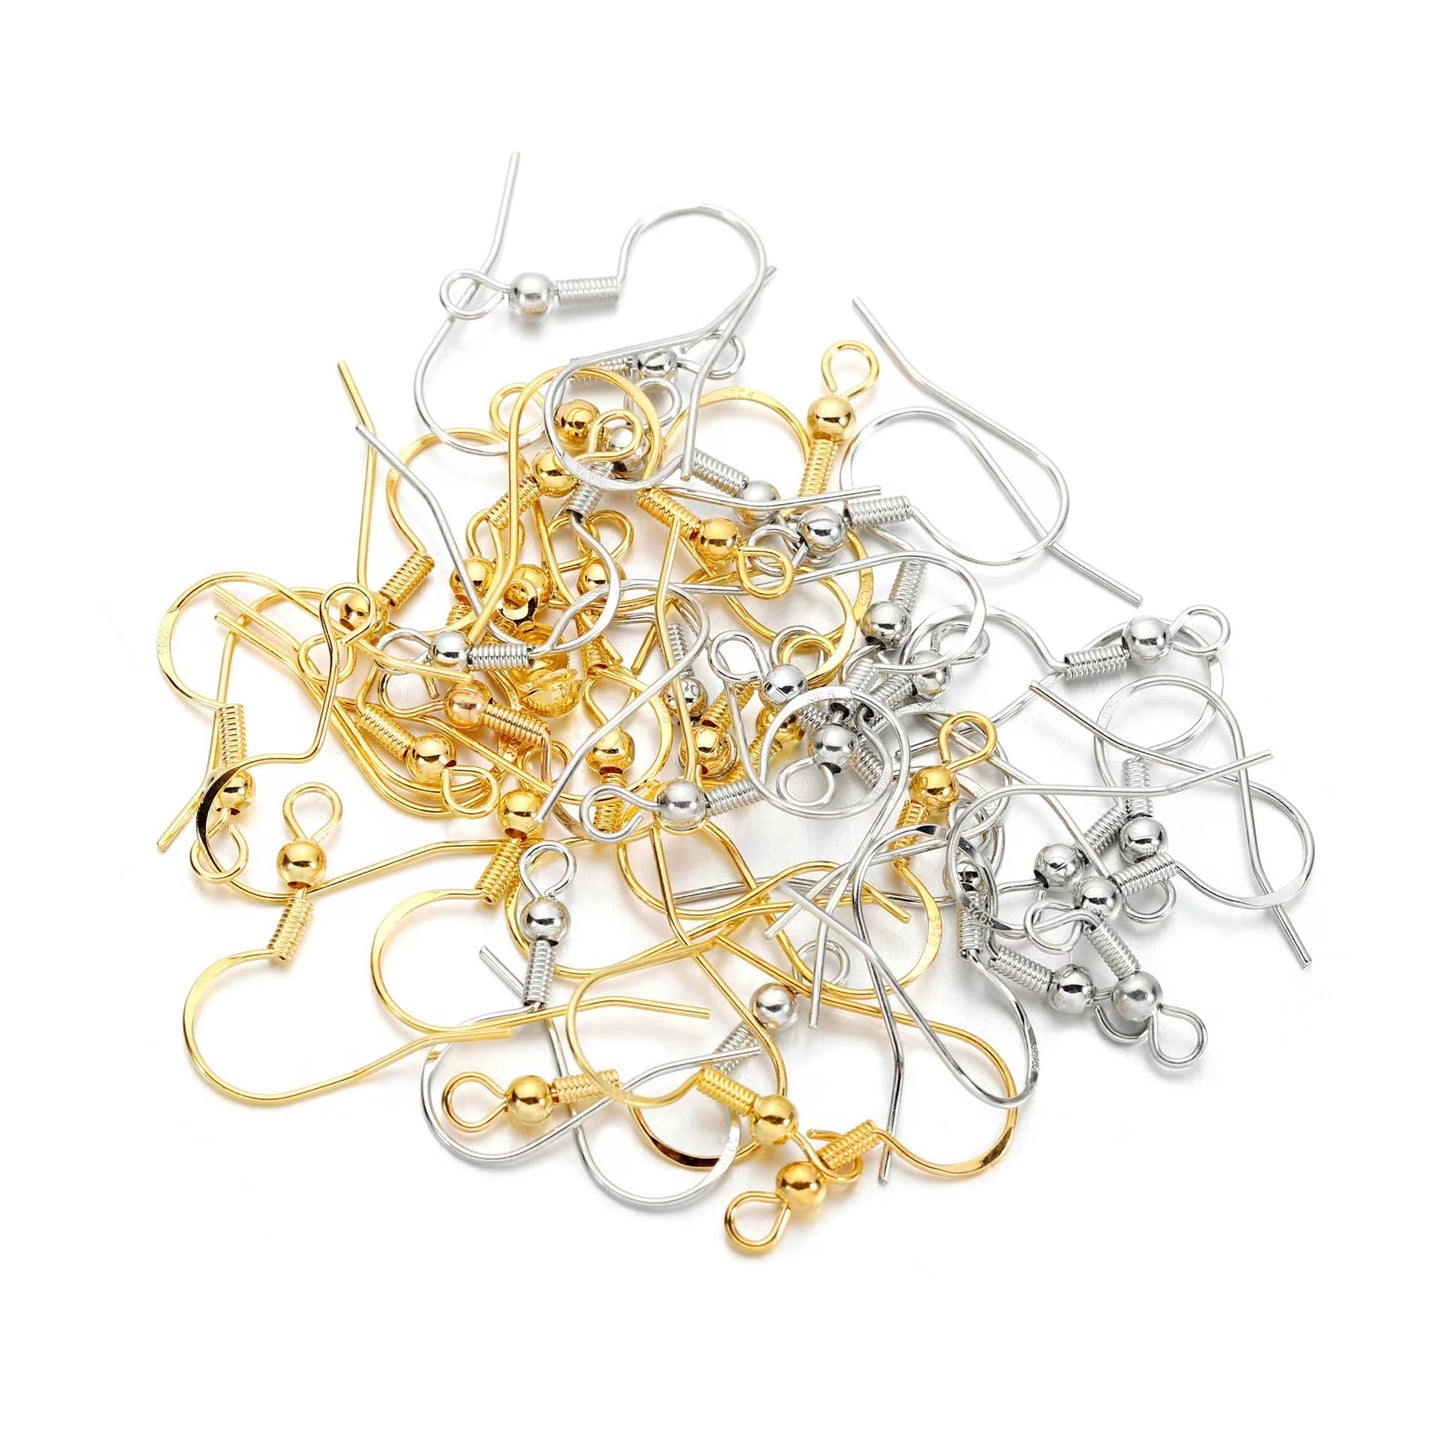 100 PCS/50 Pairs 925 Sterling Silver Earring Hooks